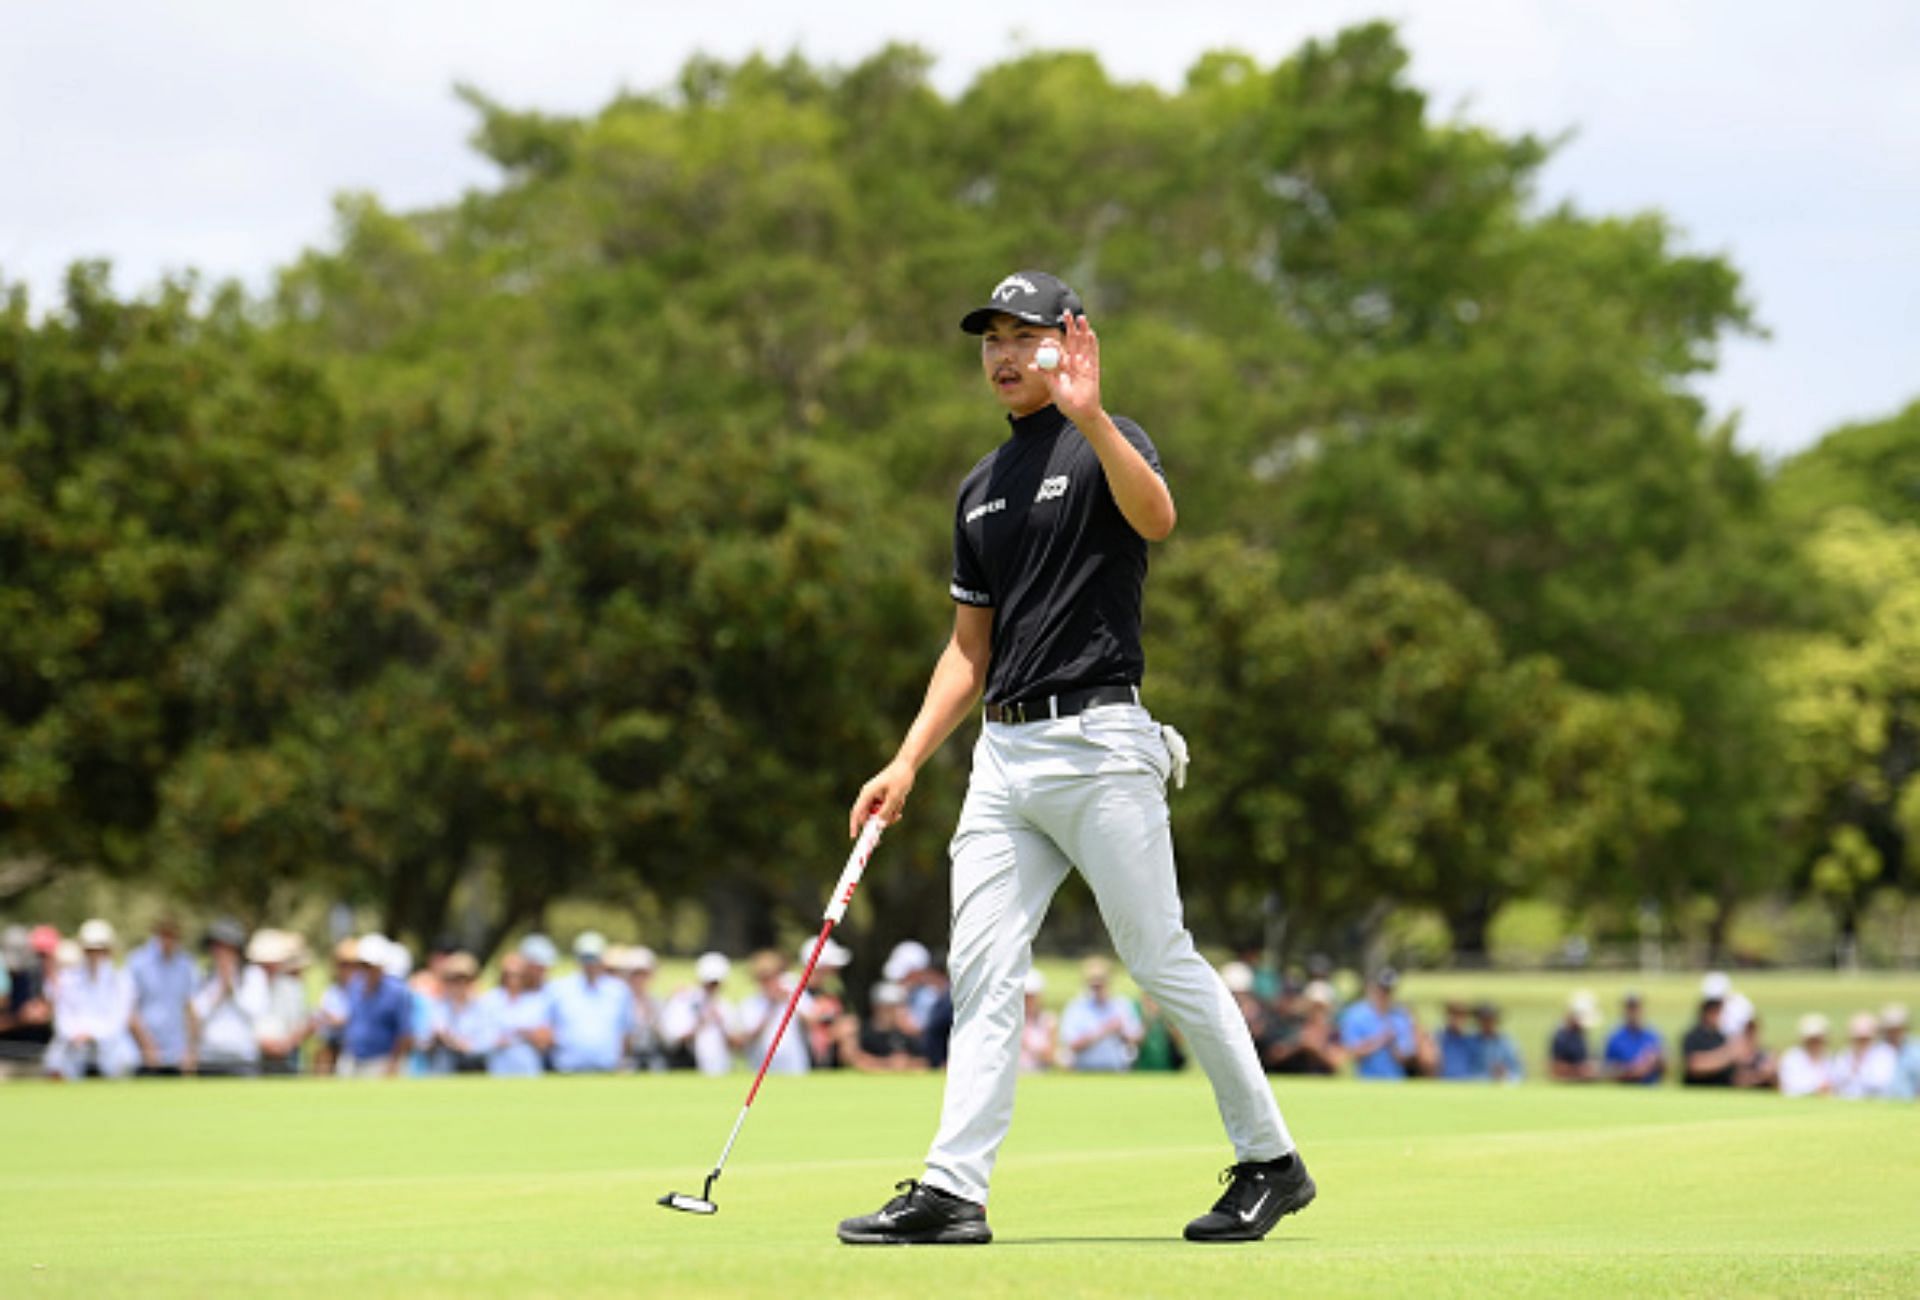 Who is leading the 2023 Australian PGA Championship after Round 2? Day